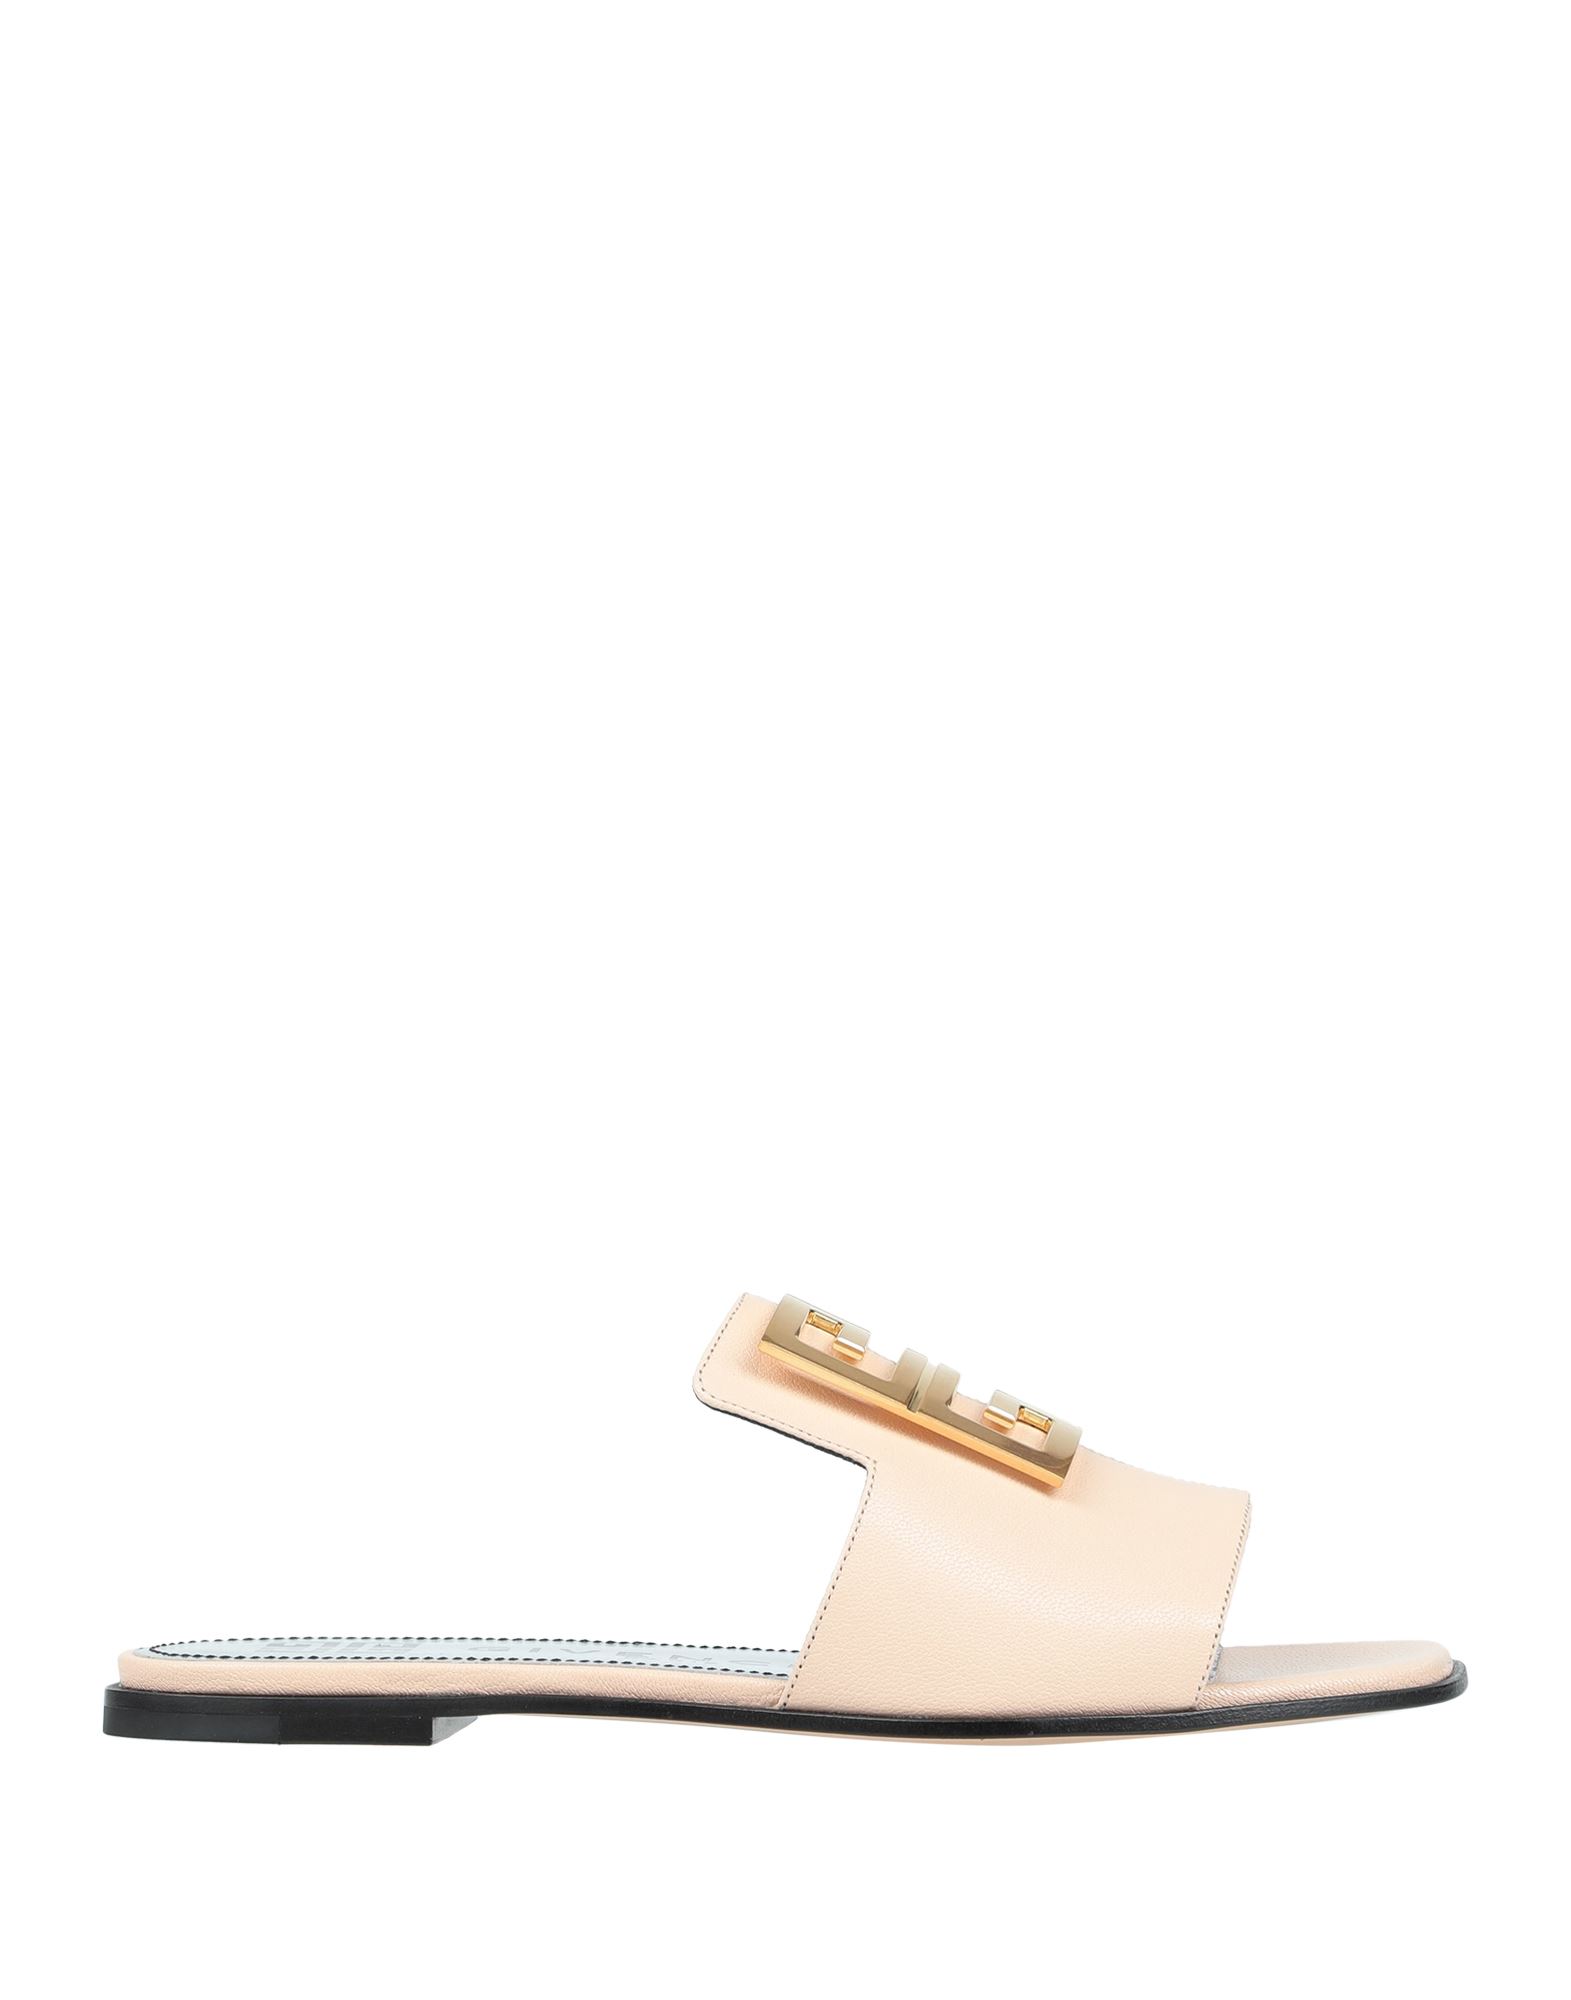 Givenchy Sandals In Pale Pink